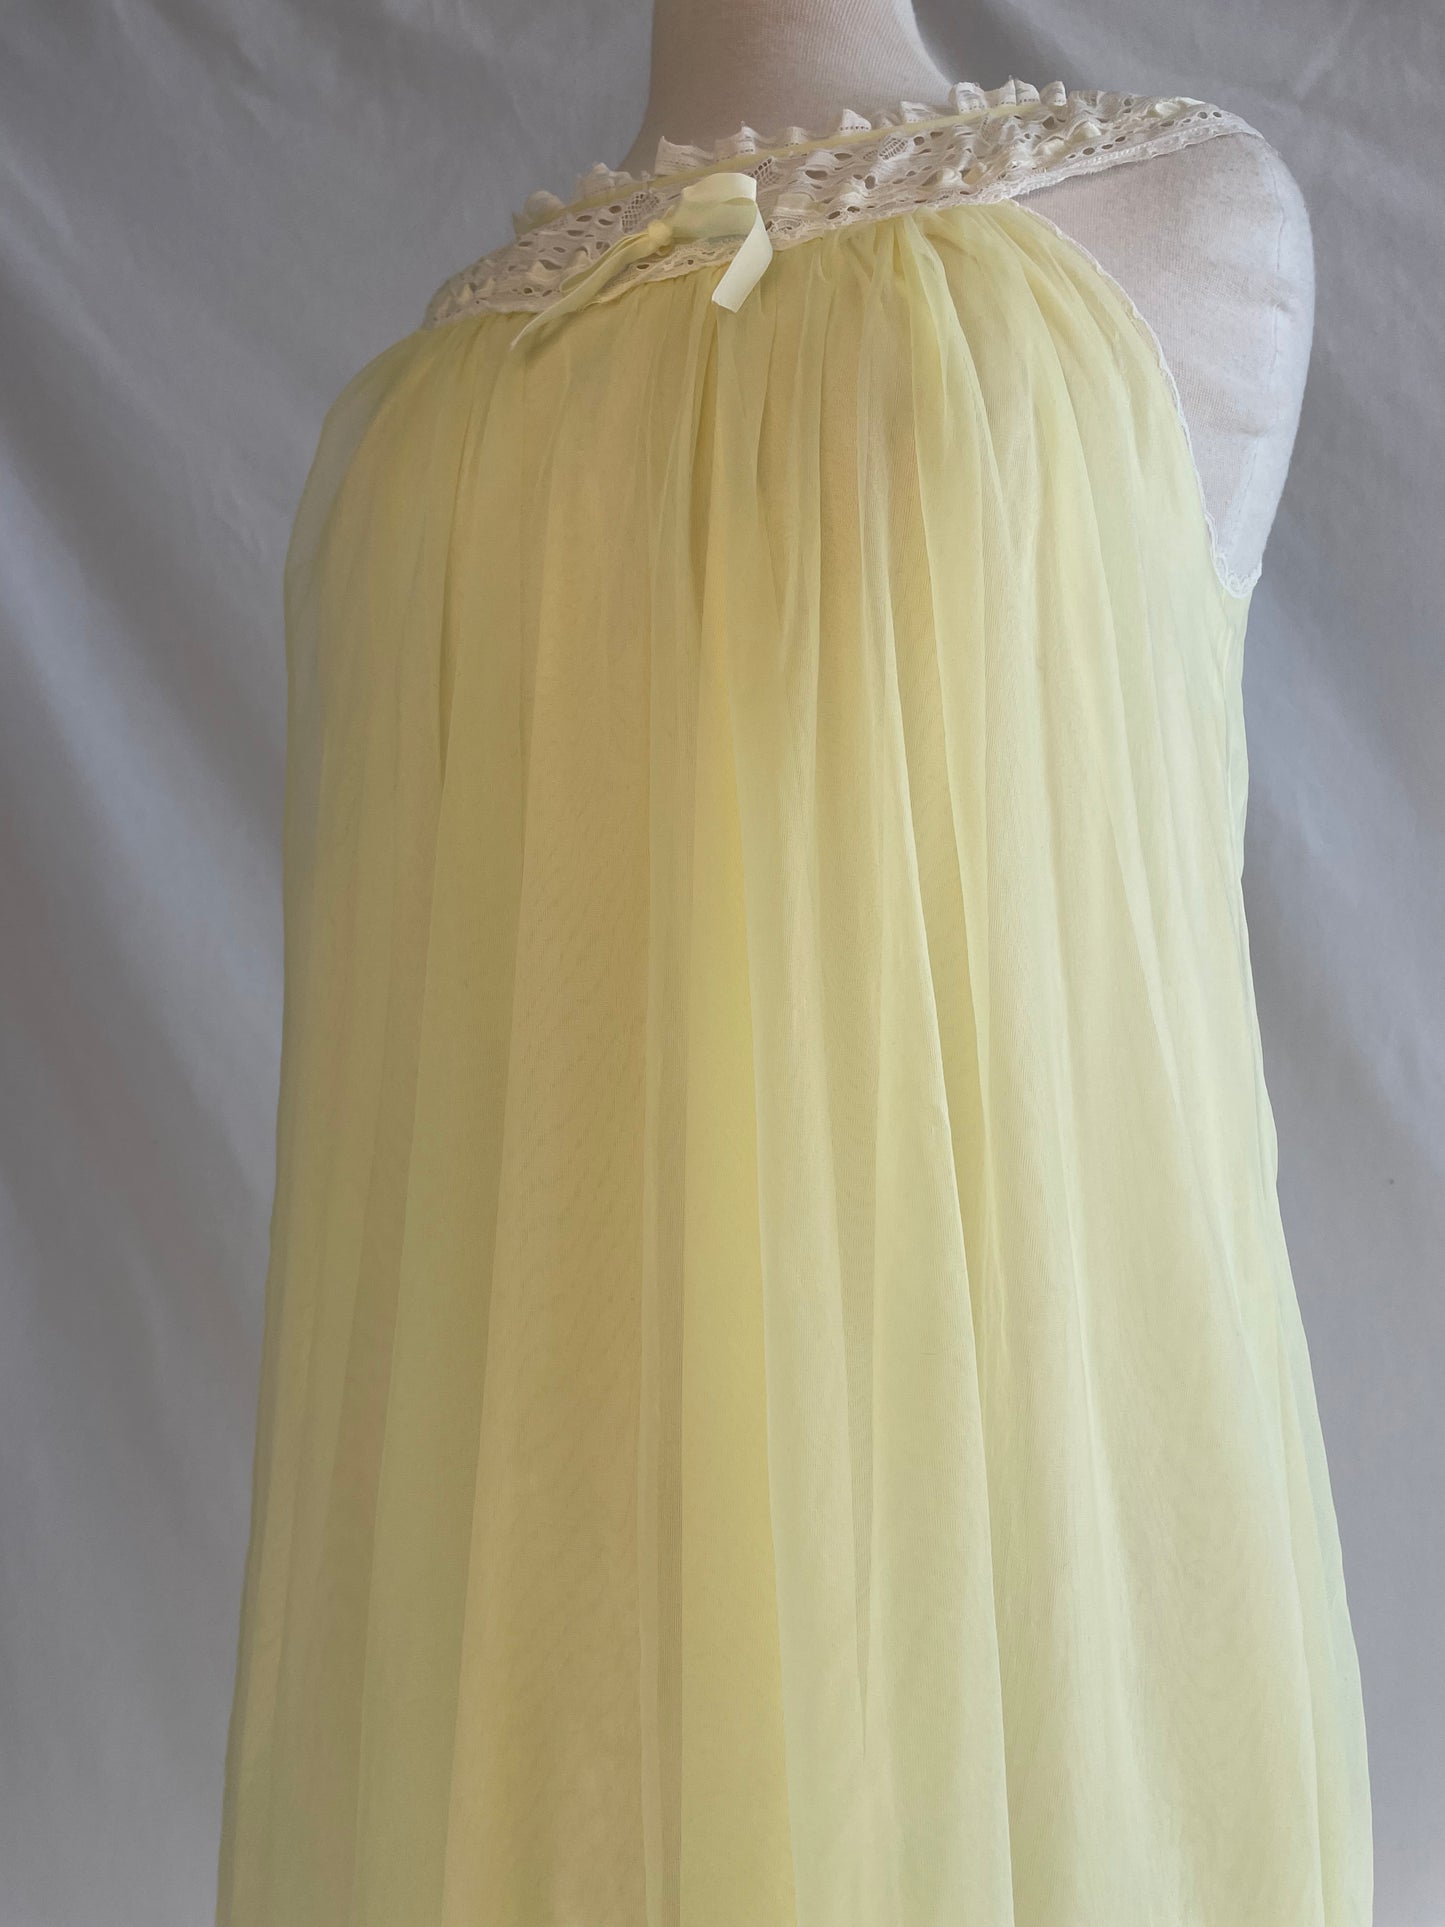 Dreamy Vintage 1960s Lisette Yellow Gown